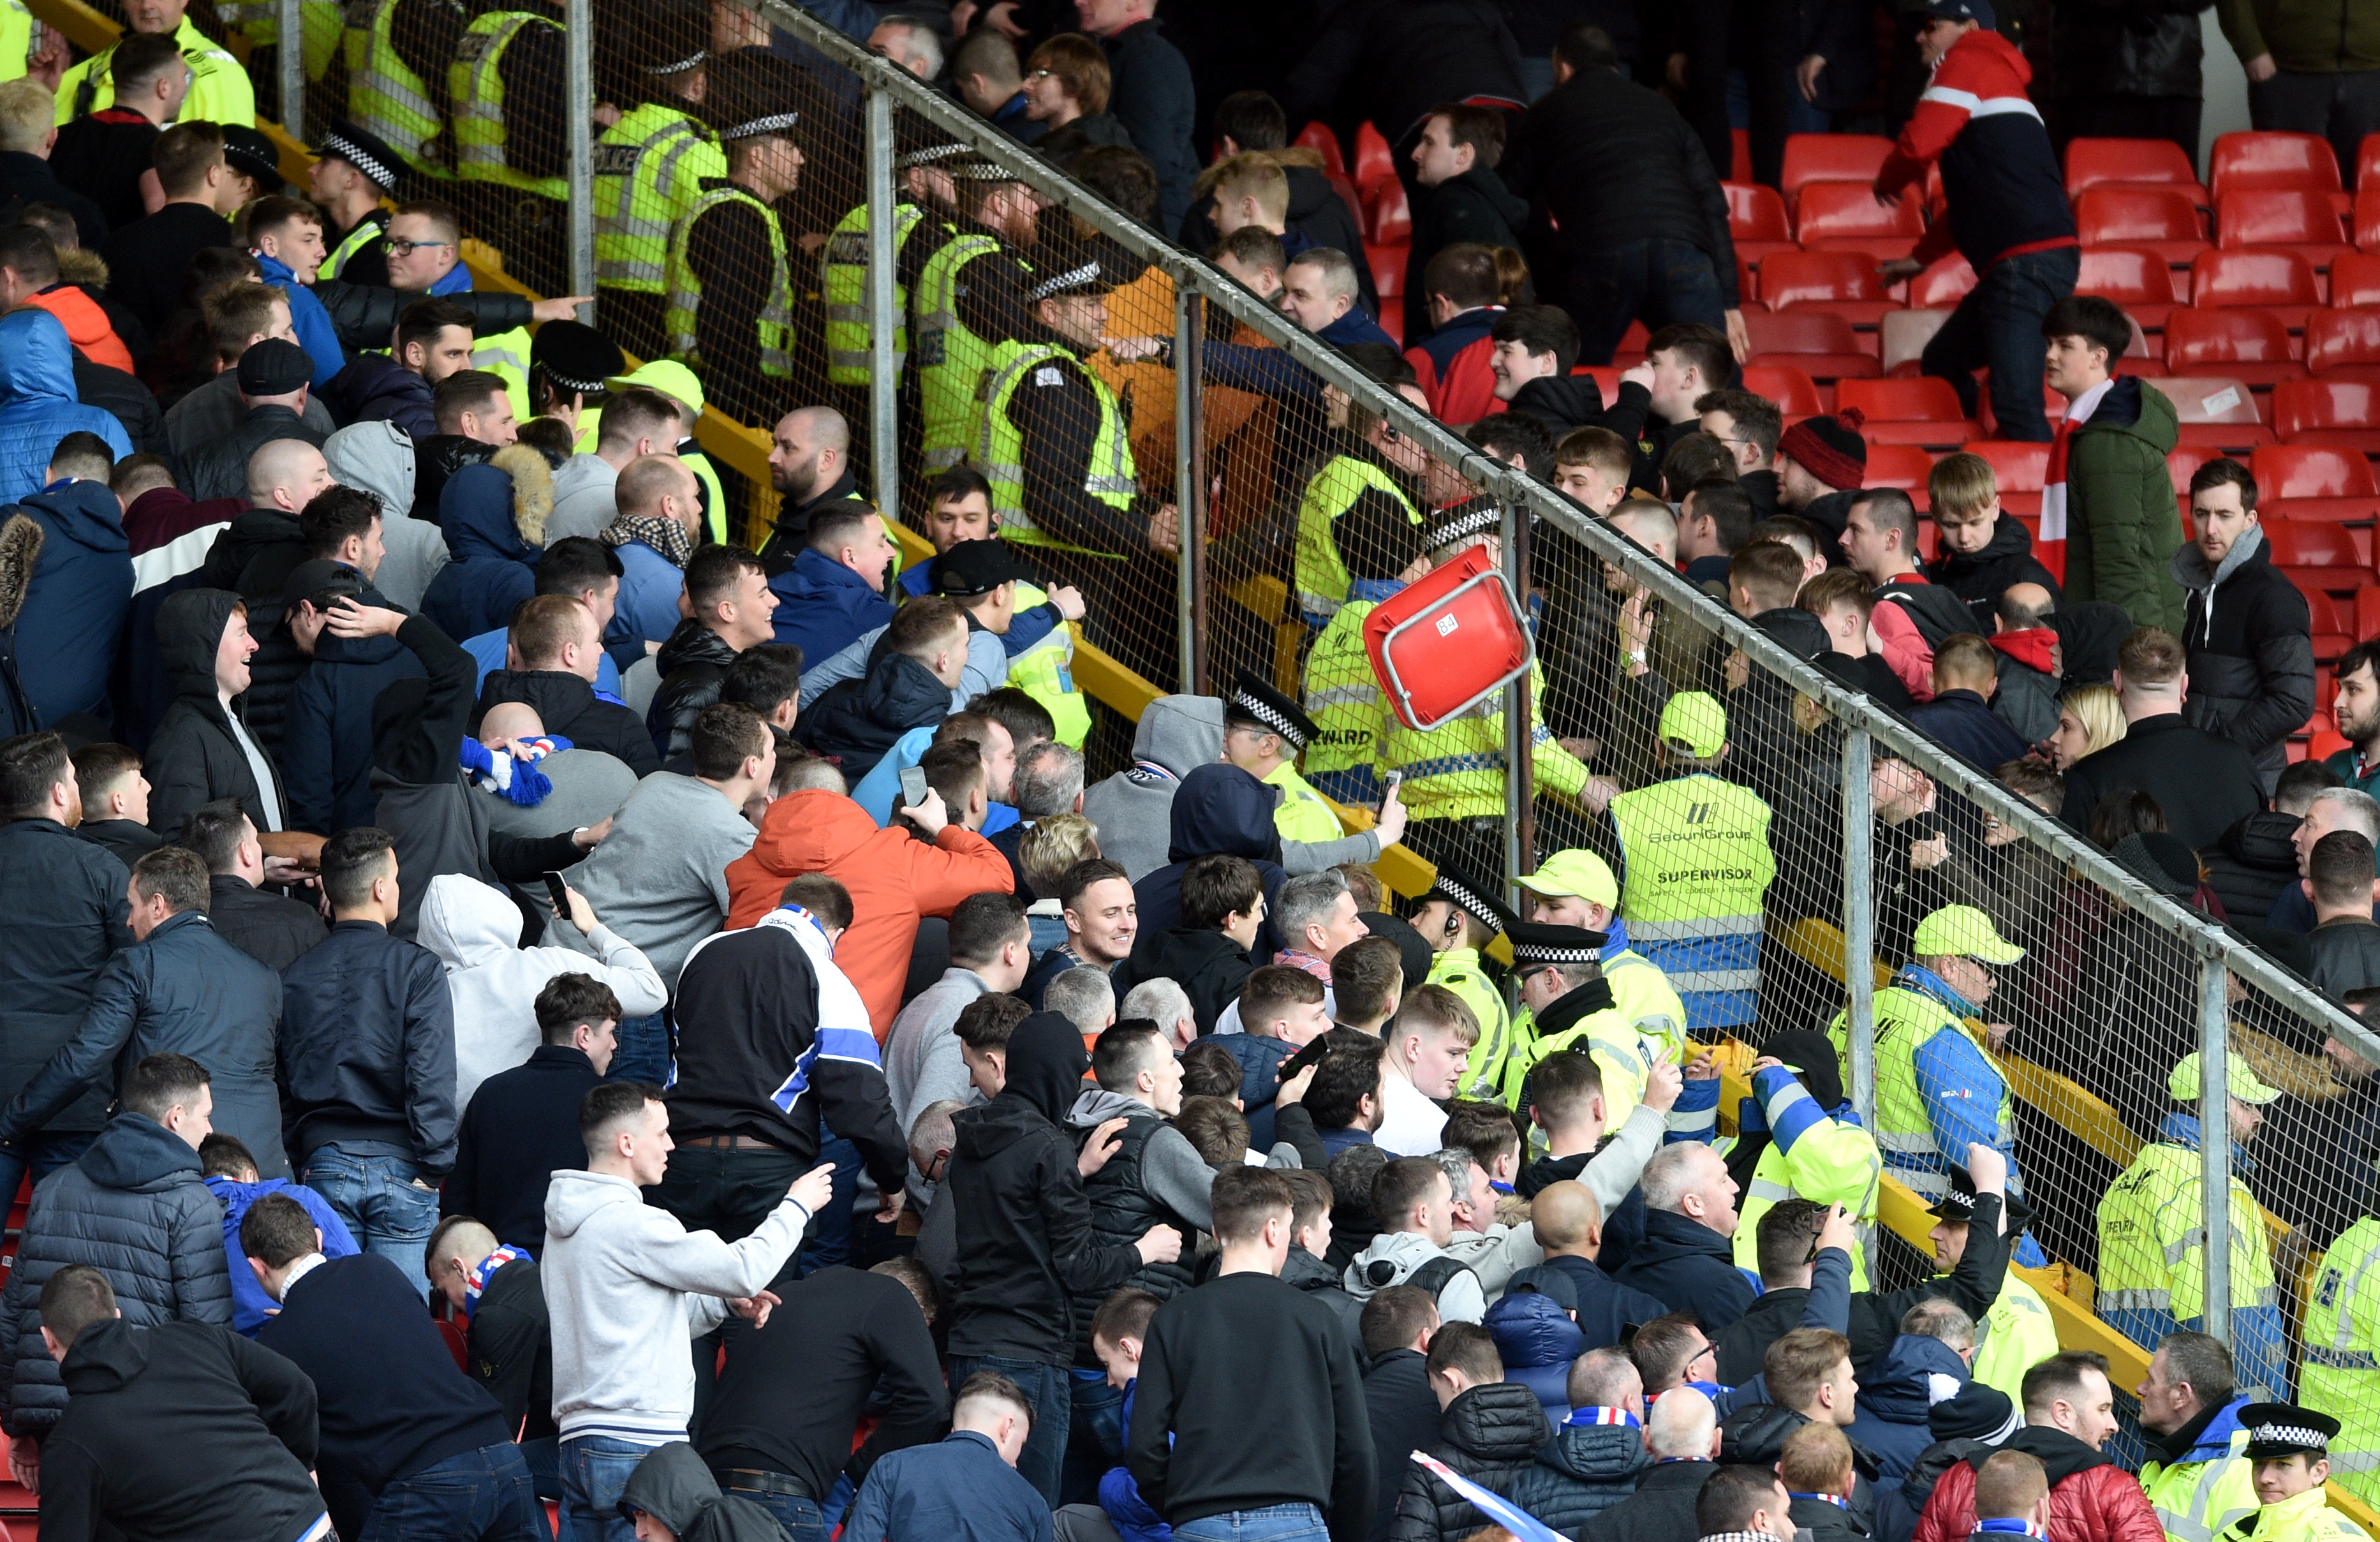 The report comes just days after trouble at Pittodrie at the end of the Aberdeen-Rangers match.